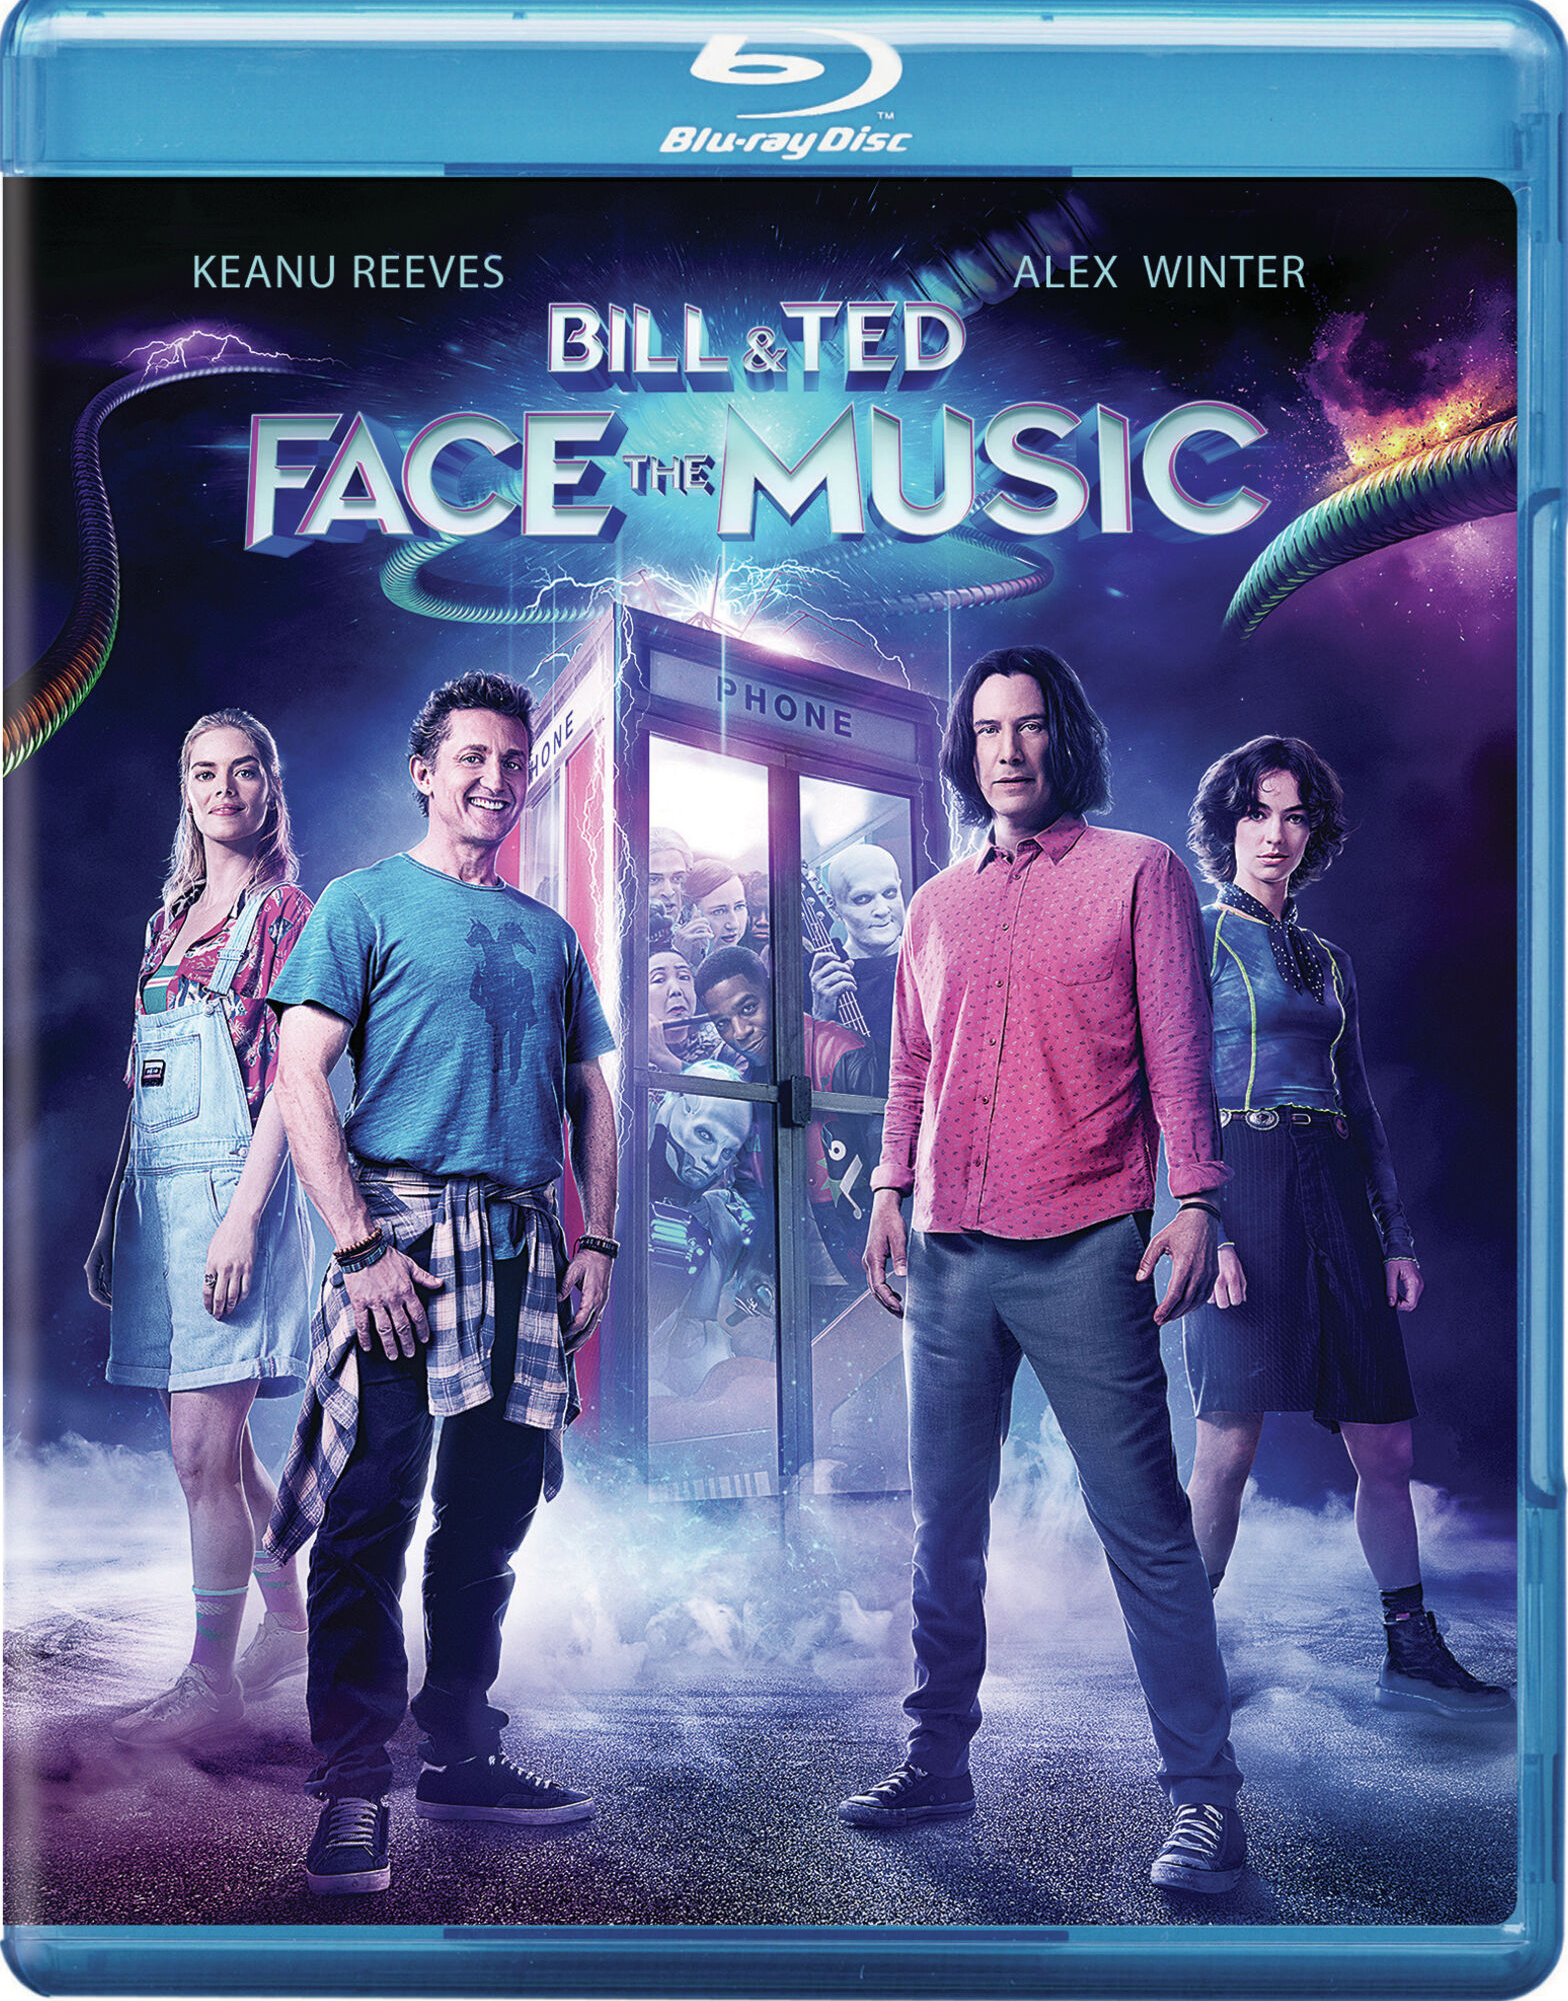 Bill & Ted Face the Music [Blu-ray] [2020]